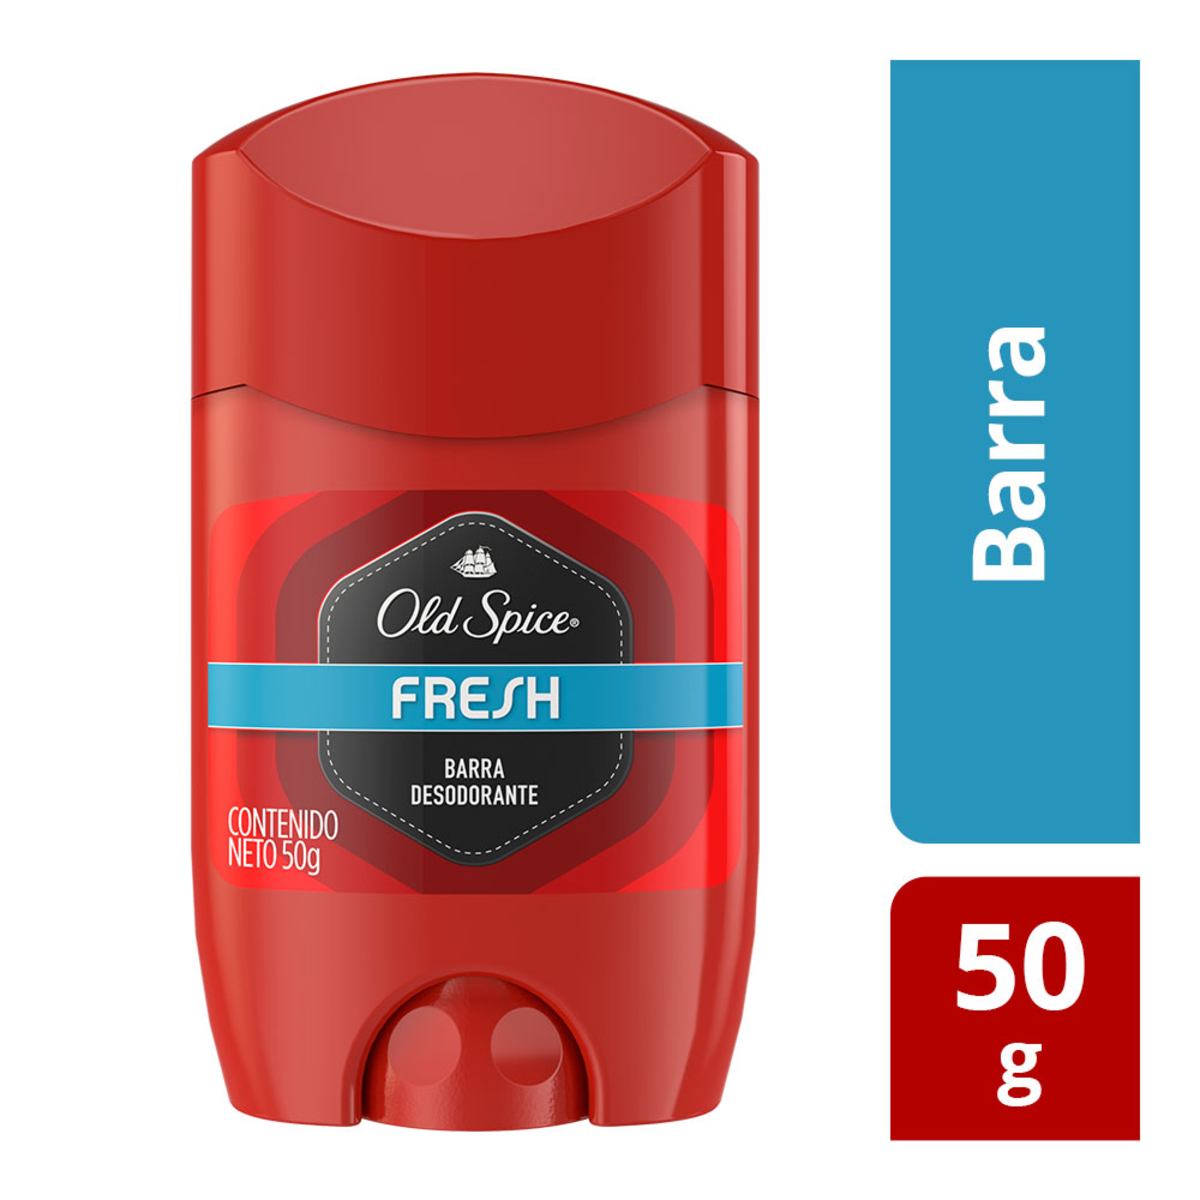 Old spice barra 50g